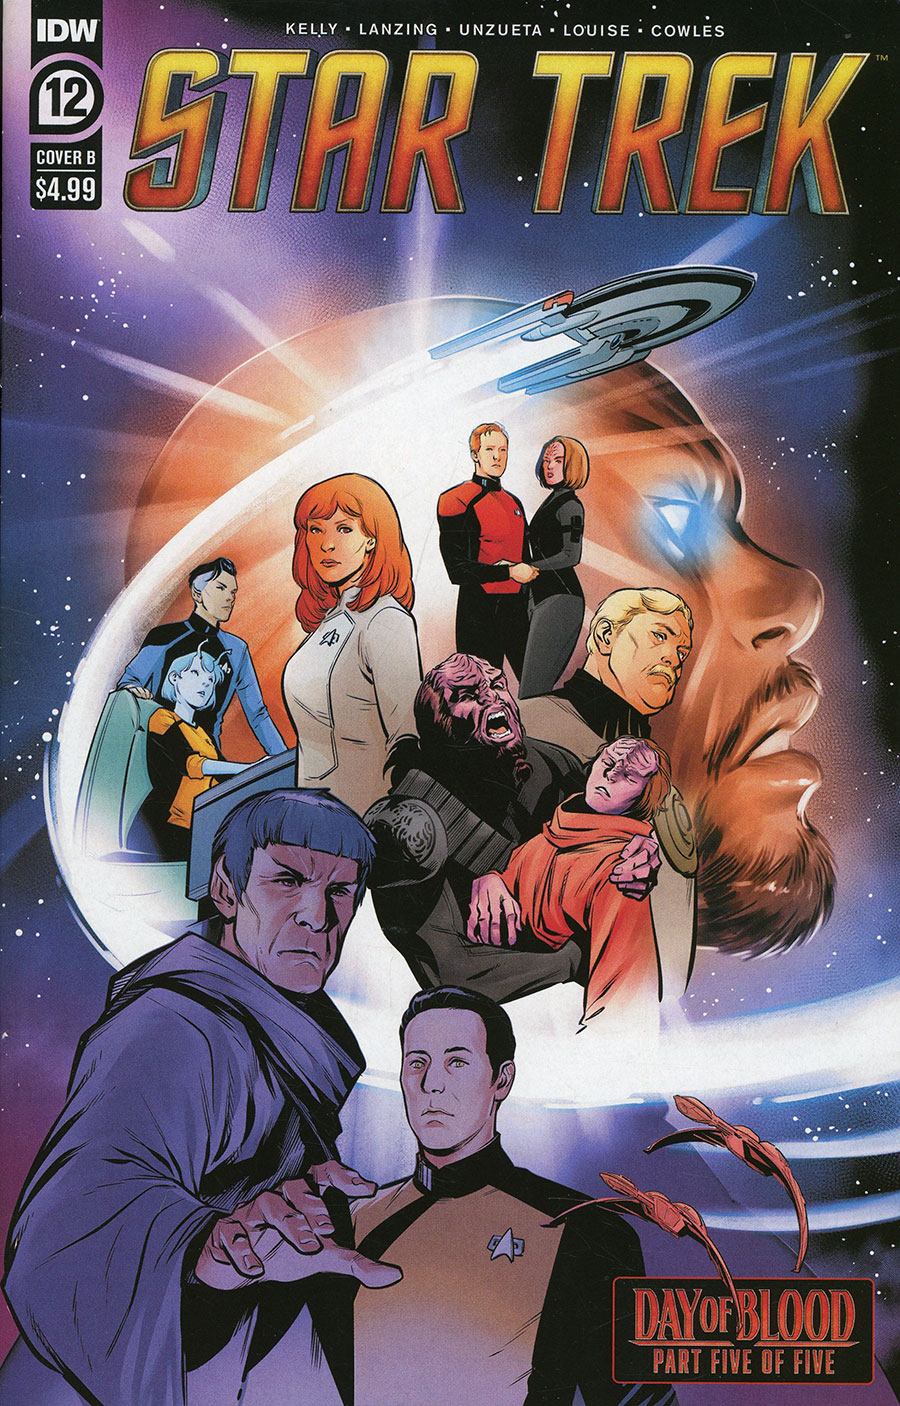 Star Trek (IDW) Vol 2 #12 Cover B Variant Marcus To Cover (Day Of Blood Part 5)